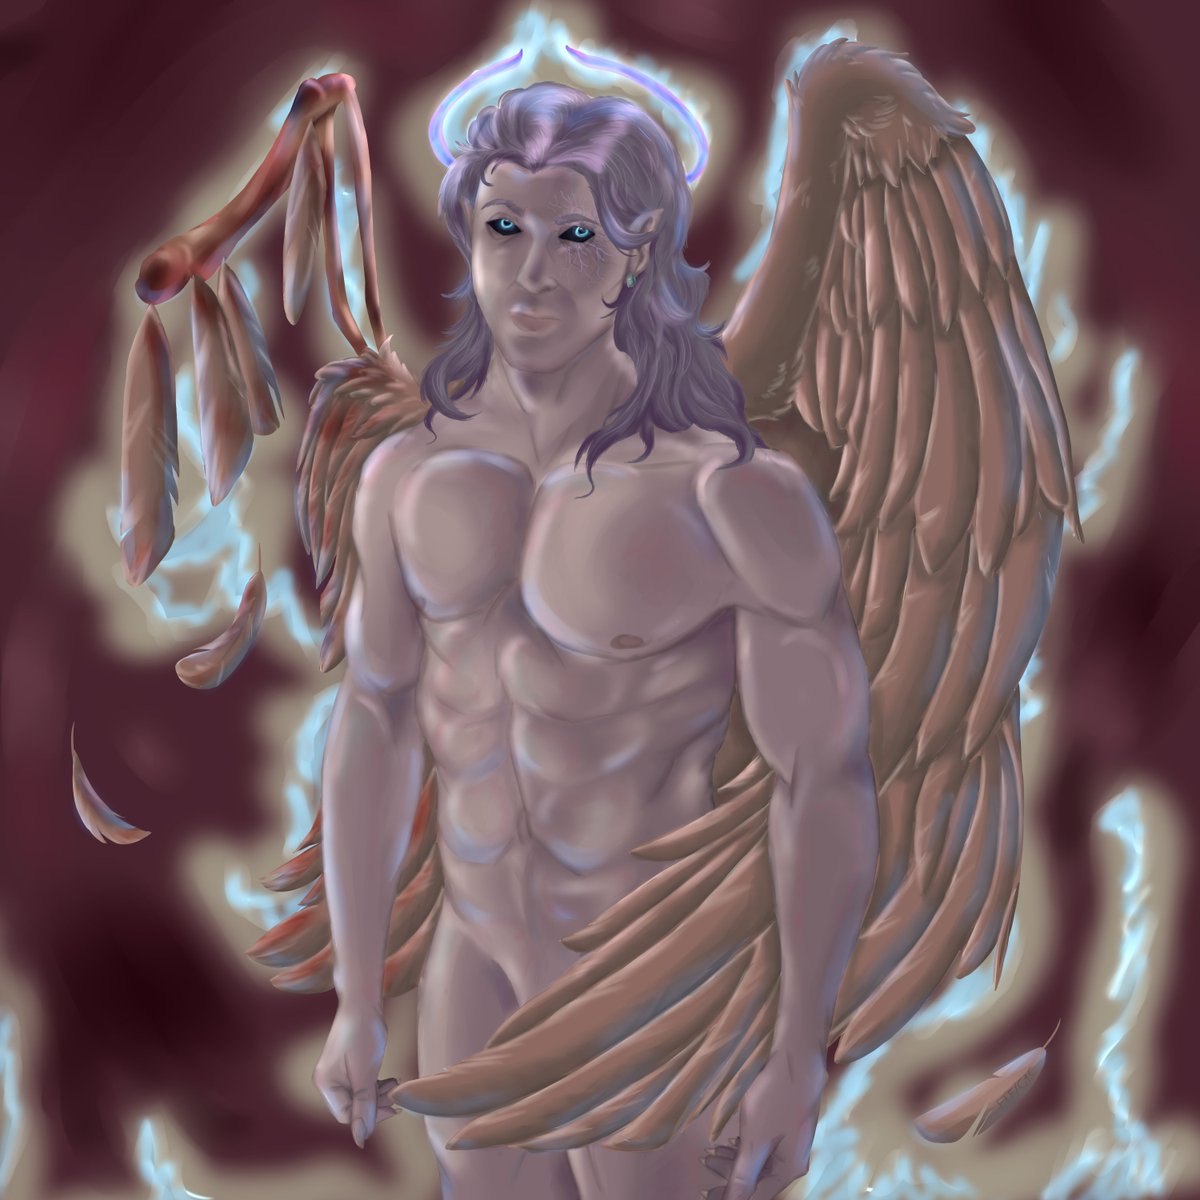 Finished my second-ever real paint recently for a contest. Not sure I'm thrilled with how it came out, but also not sure I'm equipped to have done it better. Very muddy. Maybe I'll revisit it someday!

#artmoots #humanartist #humanart #angel #originalcharacter #originalcontent